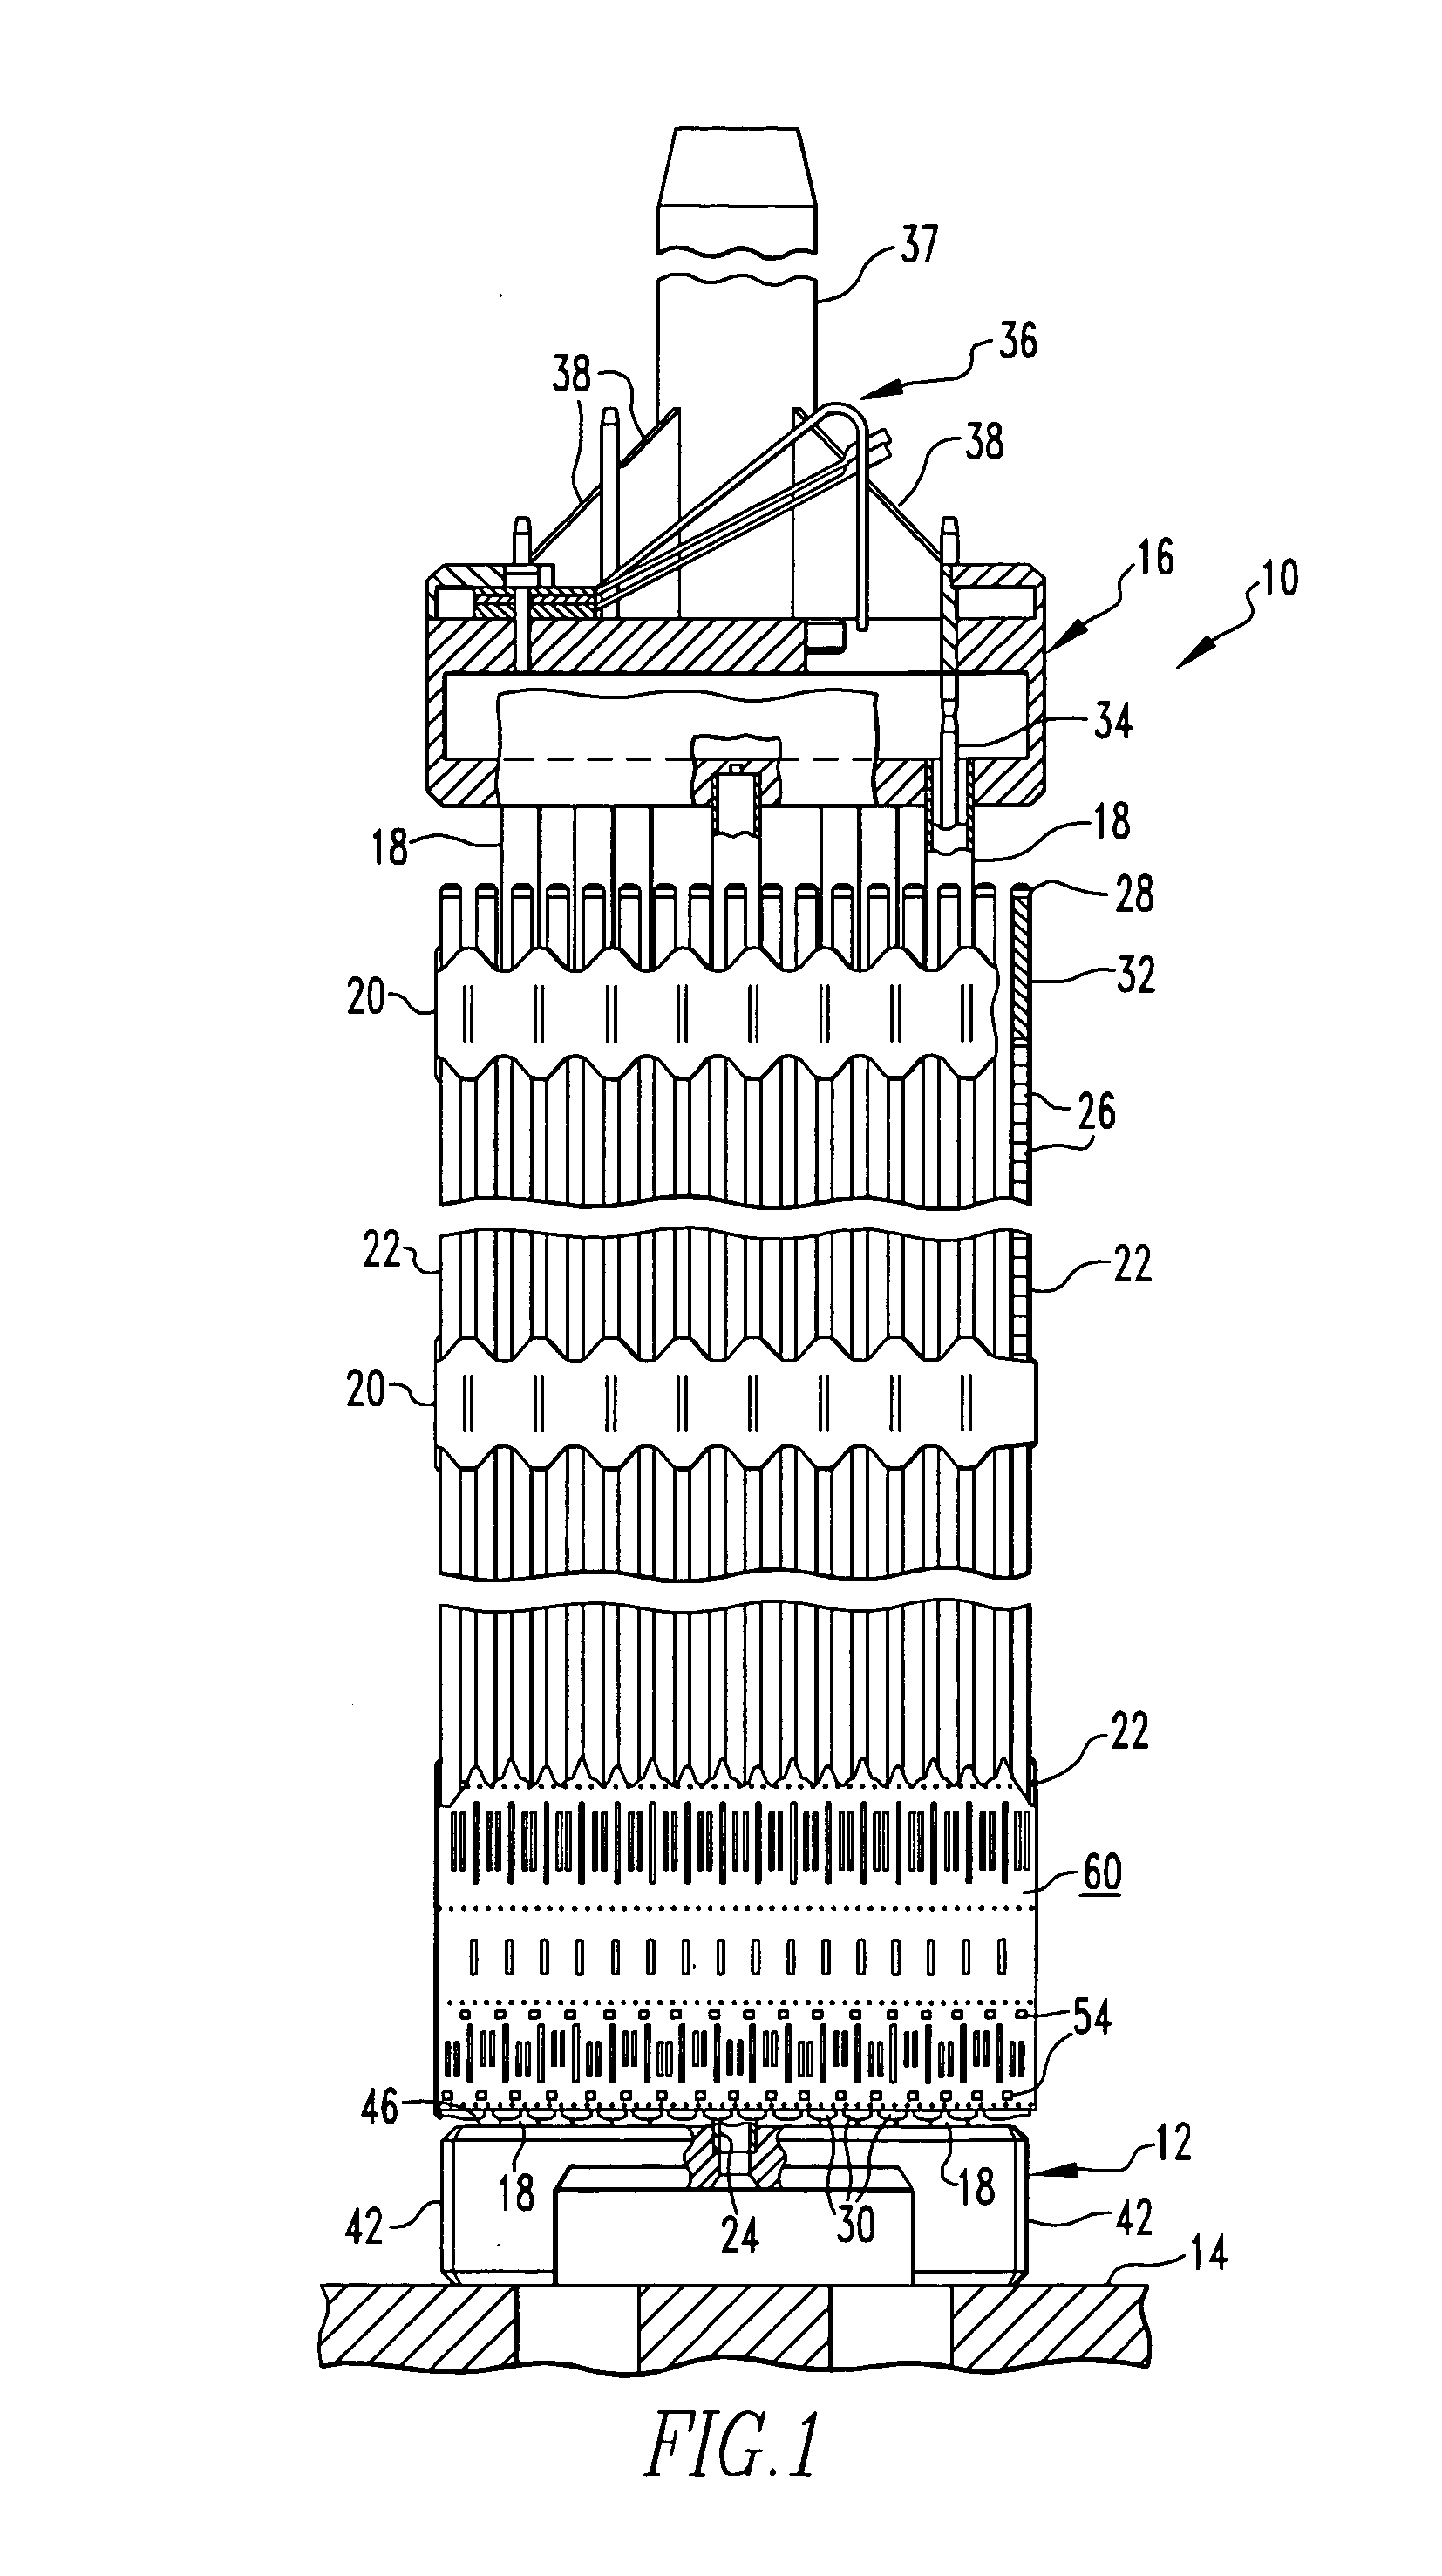 Nuclear fuel assembly protective grid